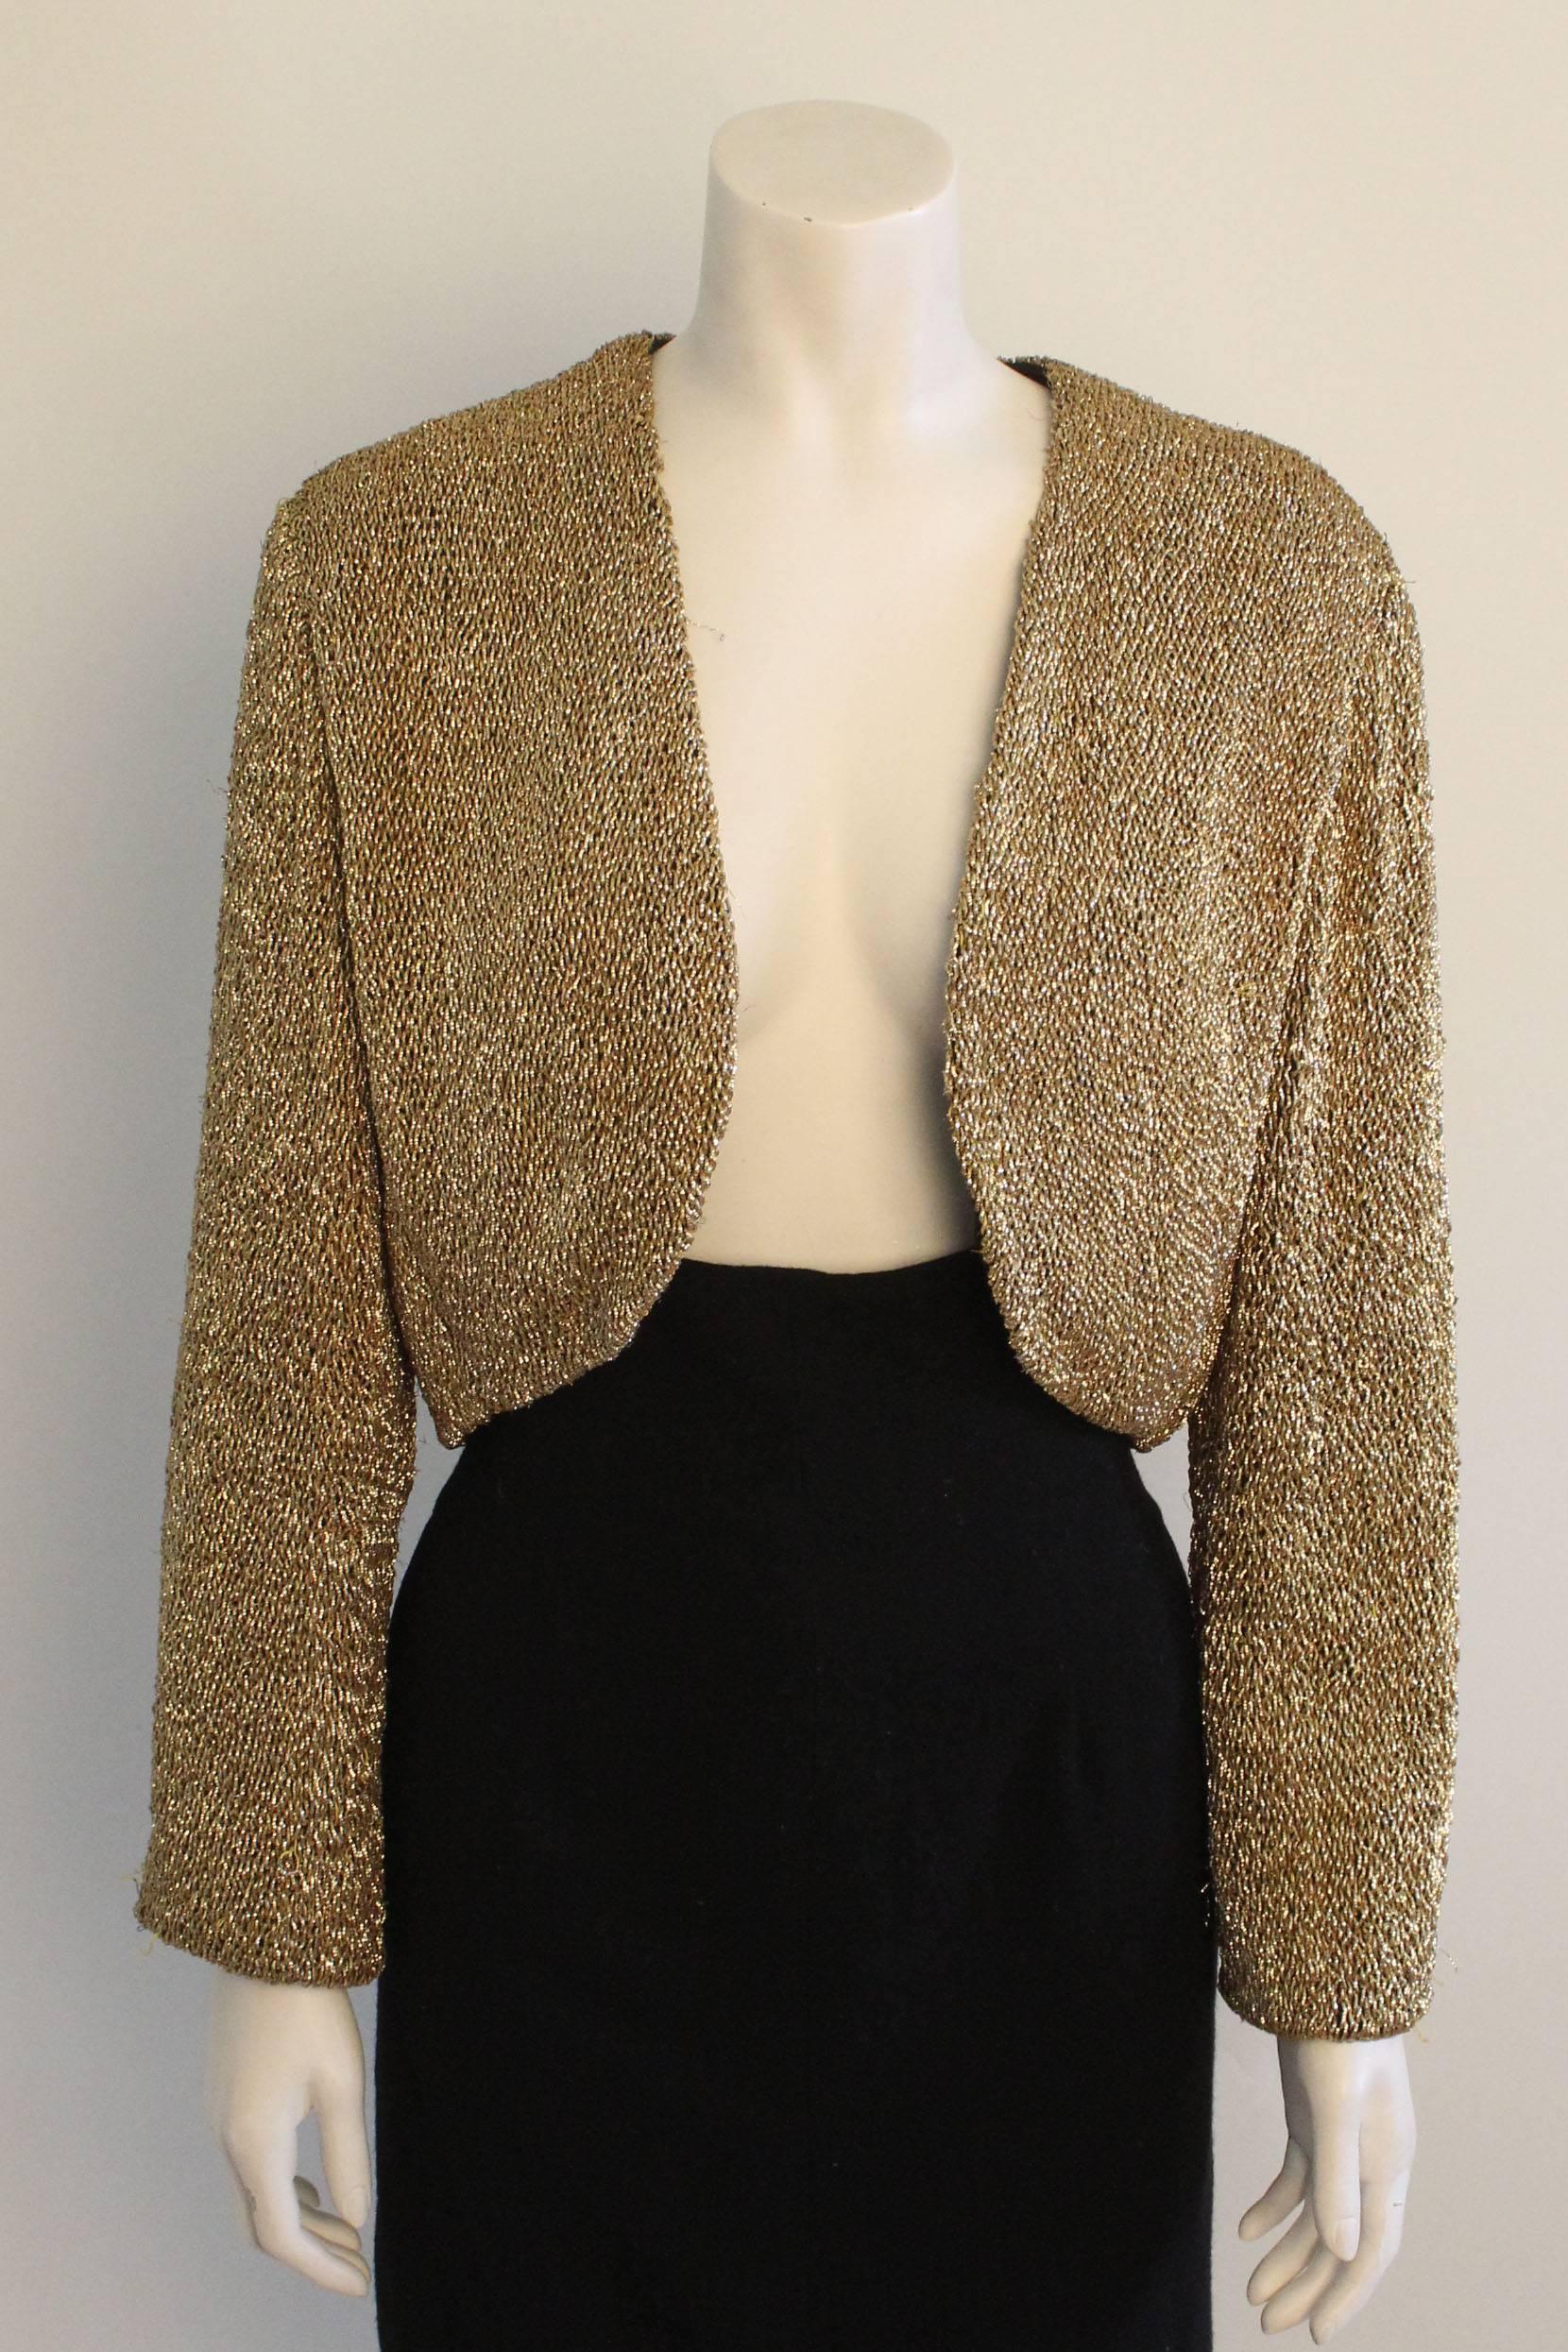 This outstanding jacket by Anne Klein is constructed from twisted metallic thread that gives the effect of an overall beaded surface. It is lined in 100% silk. 